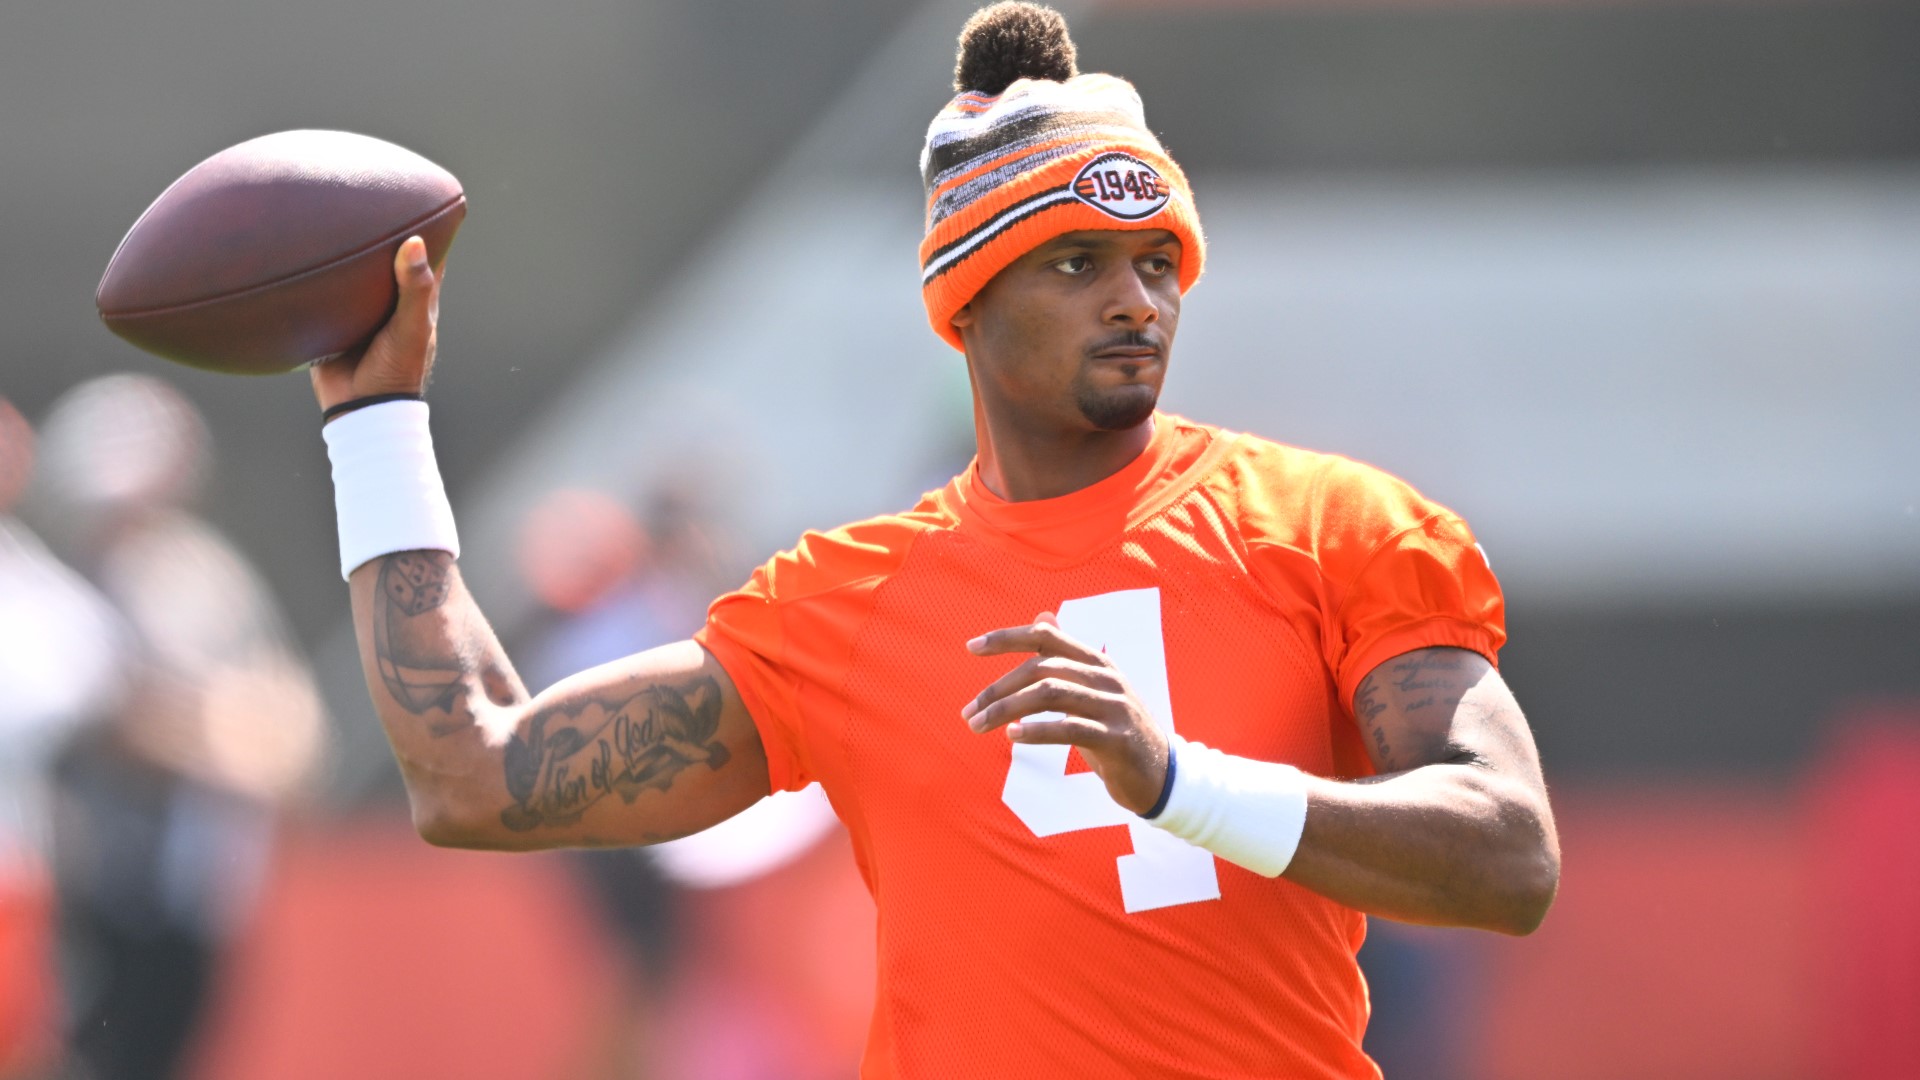 Cleveland Browns quarterback Deshaun Watson’s hearing will continue on Wednesday after his legal team and the NFL presented their arguments.